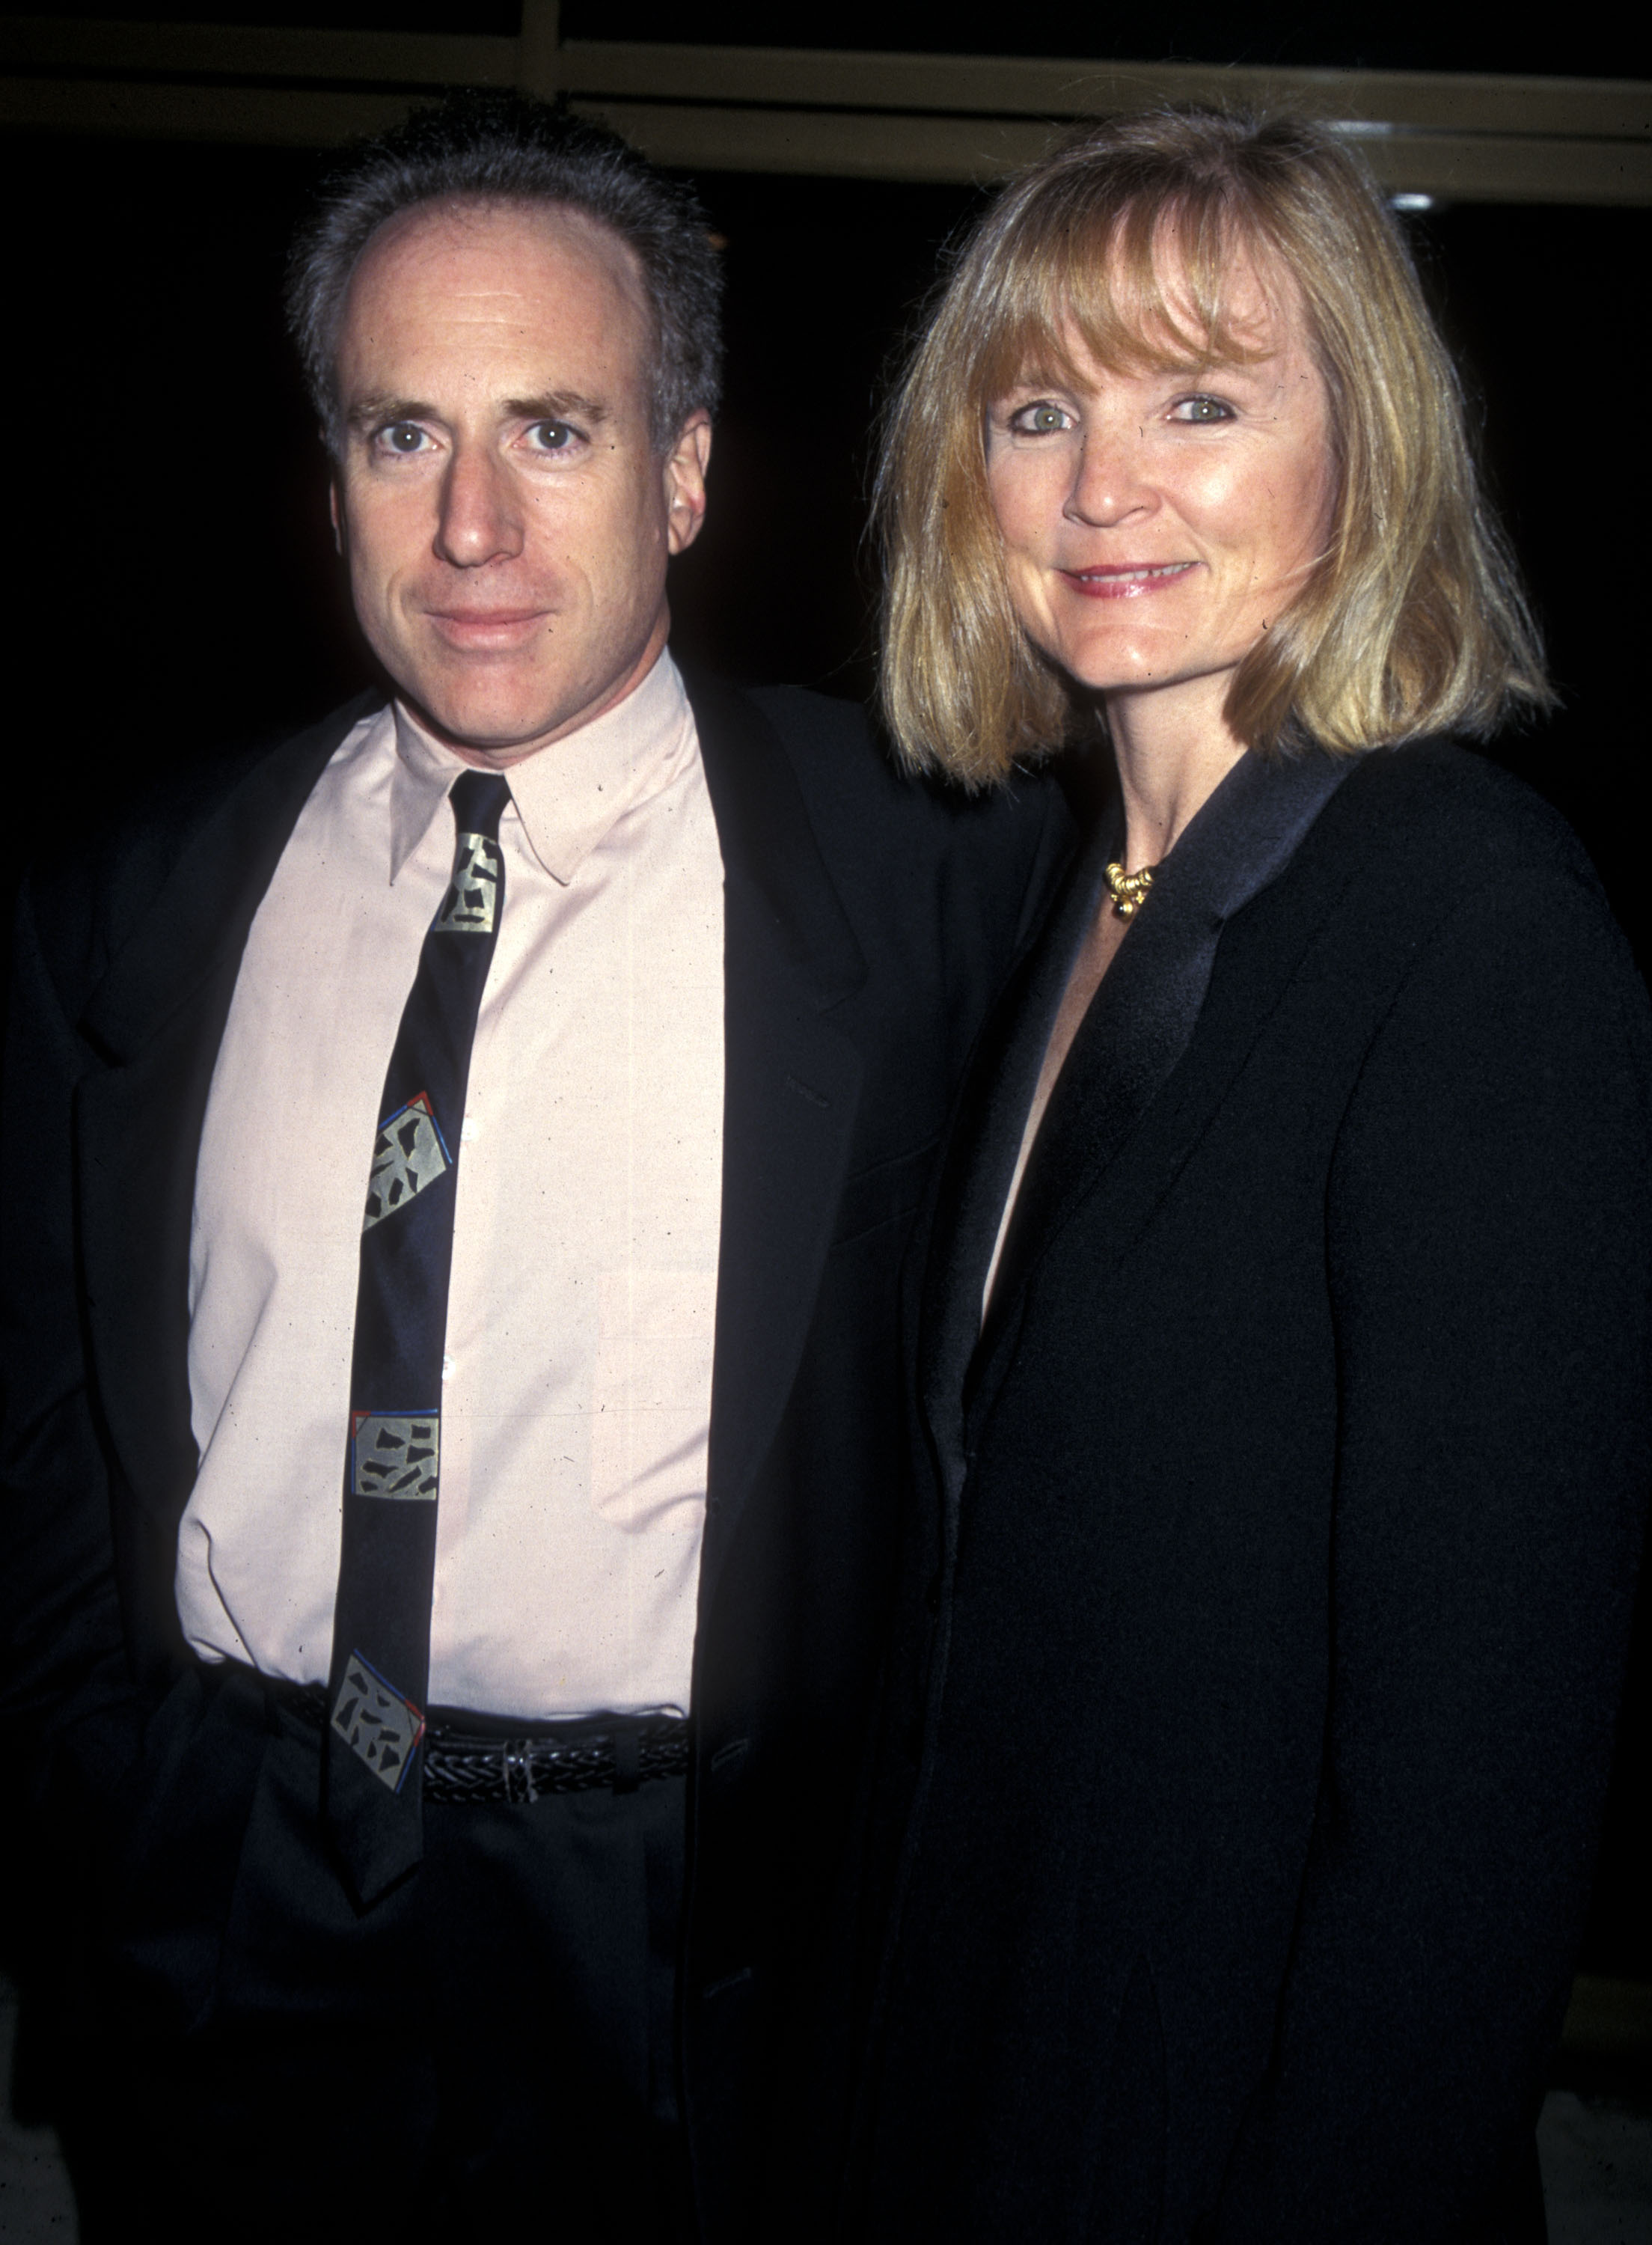 Sam Weisman and Constance McCashin at the "Bye Bye Love" Westwood premiere on March 8, 1995, in Westwood, California | Source: Getty Images